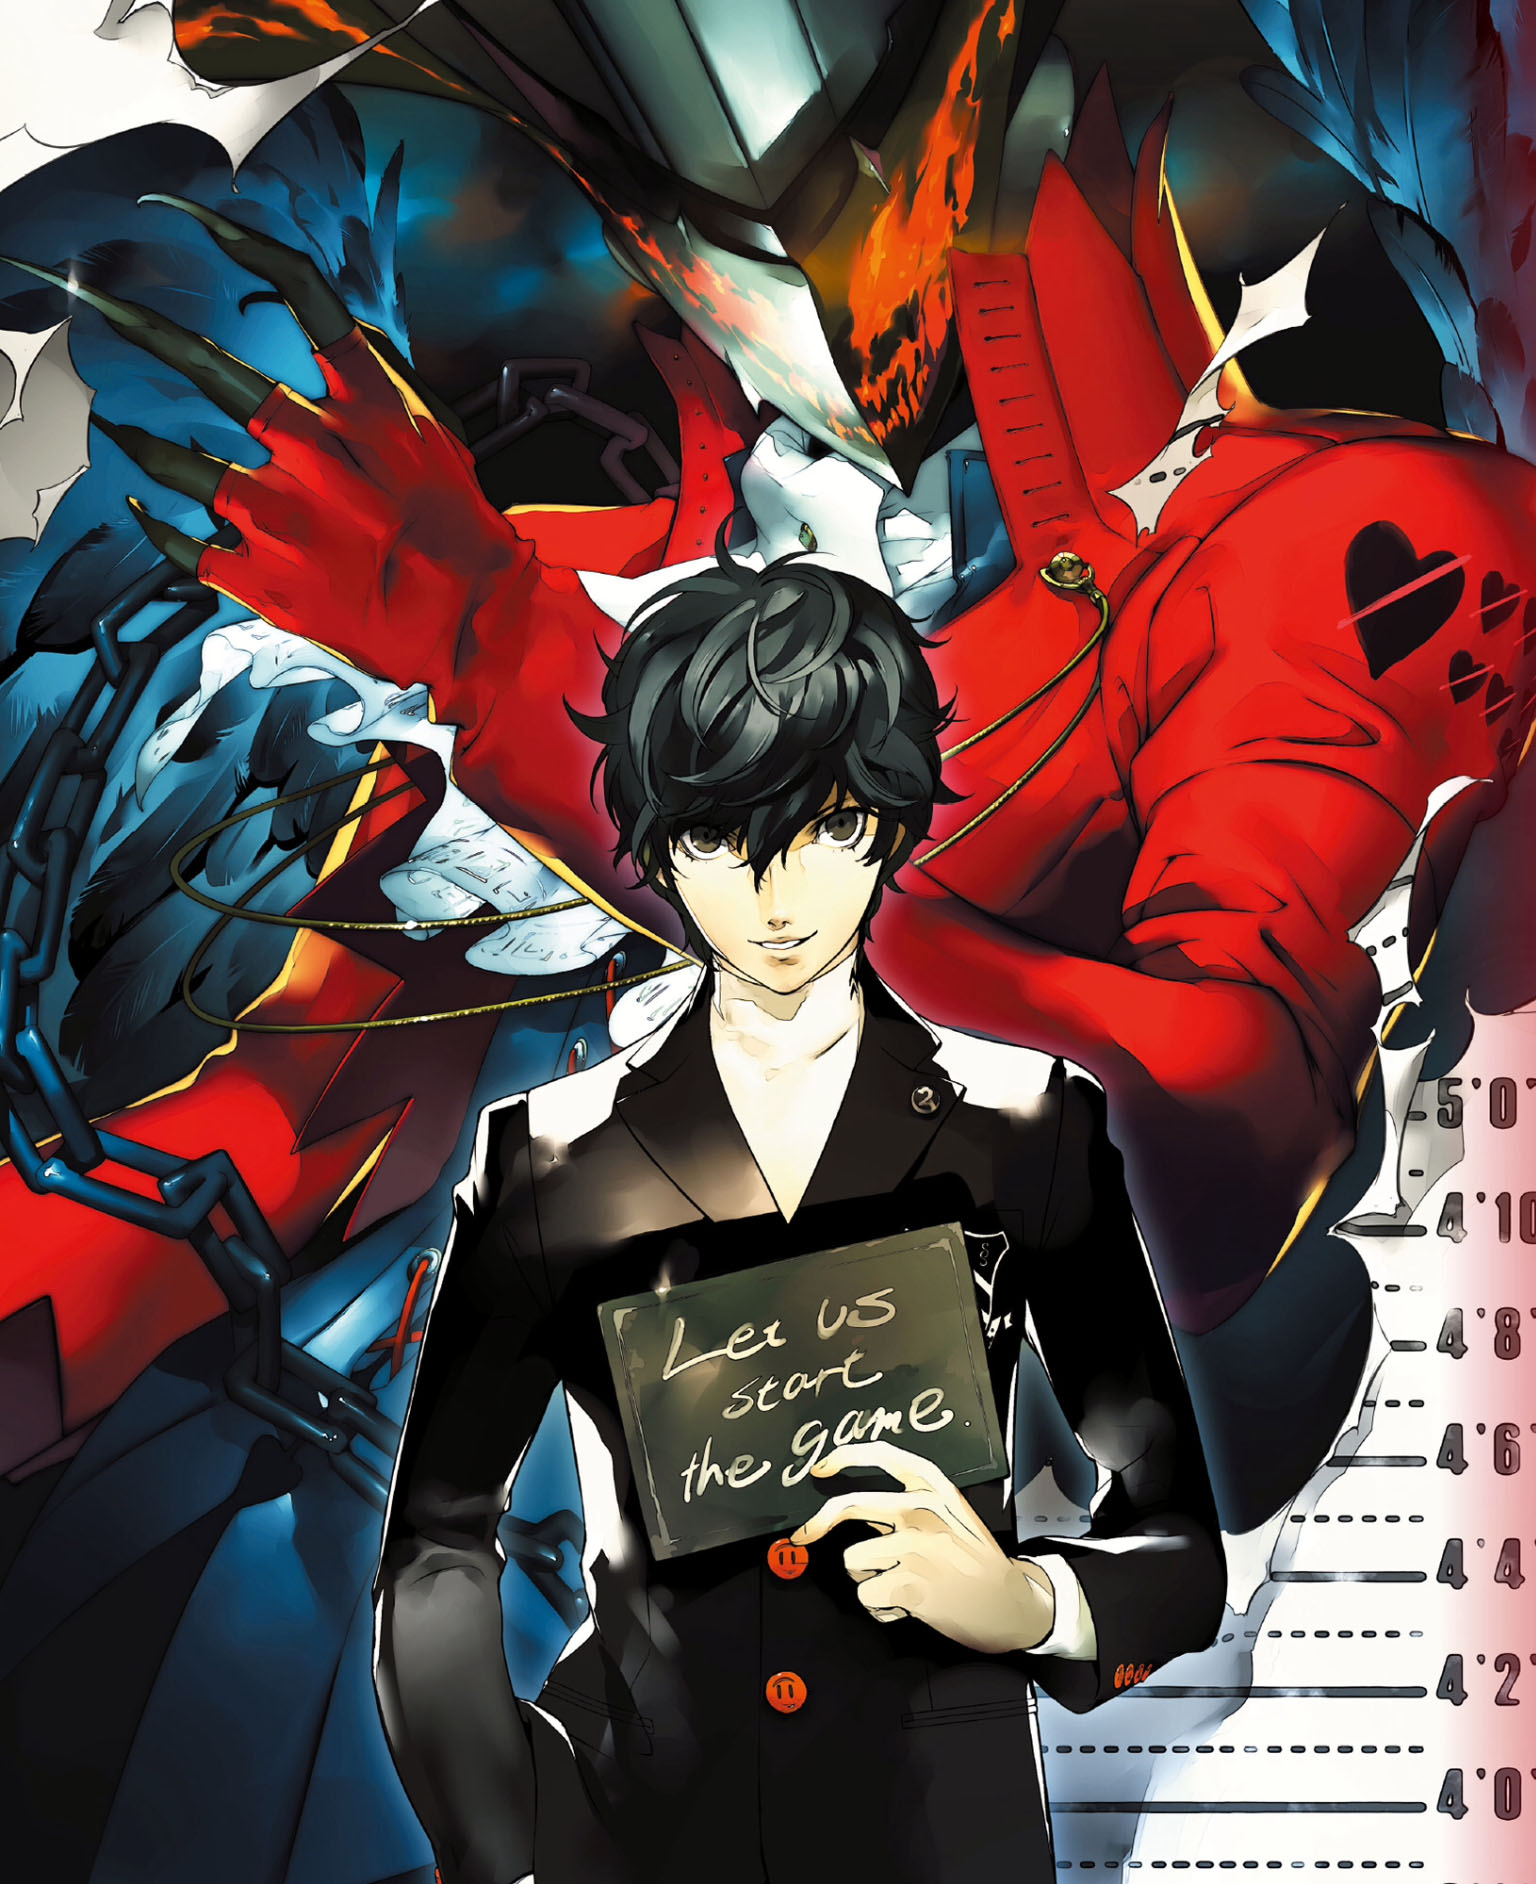 Persona 5 Characters & Gameplay Footage - Page 4 - Persona 5 - PSNProfiles